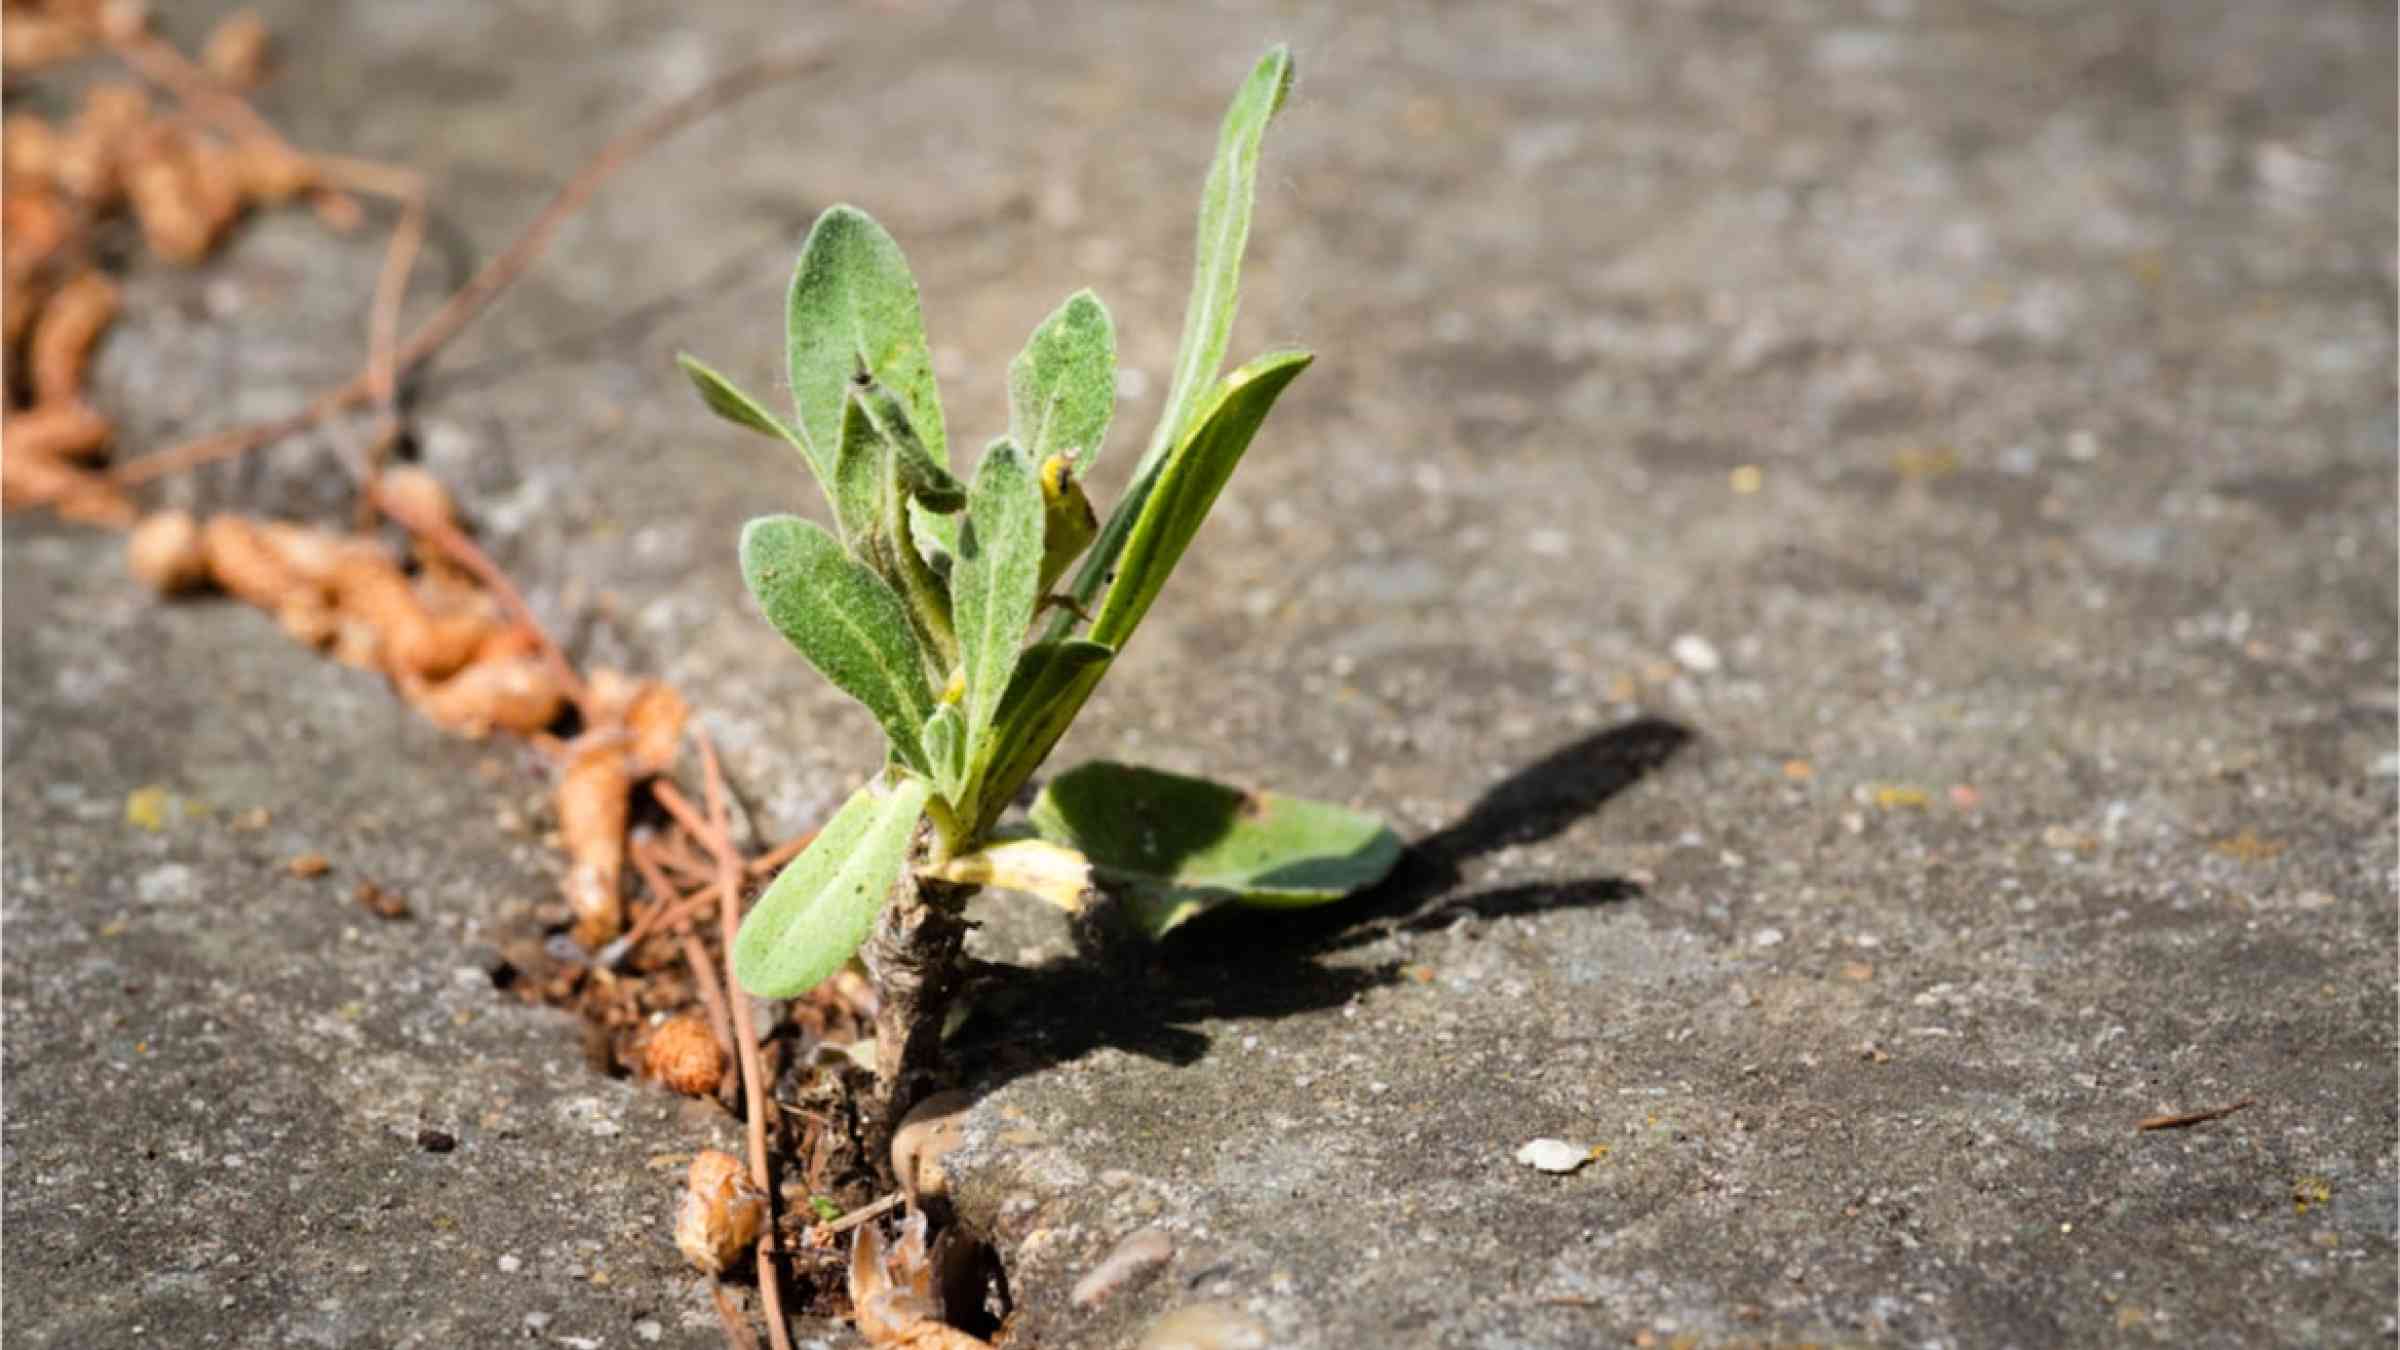 A resilient plant growing on a street.